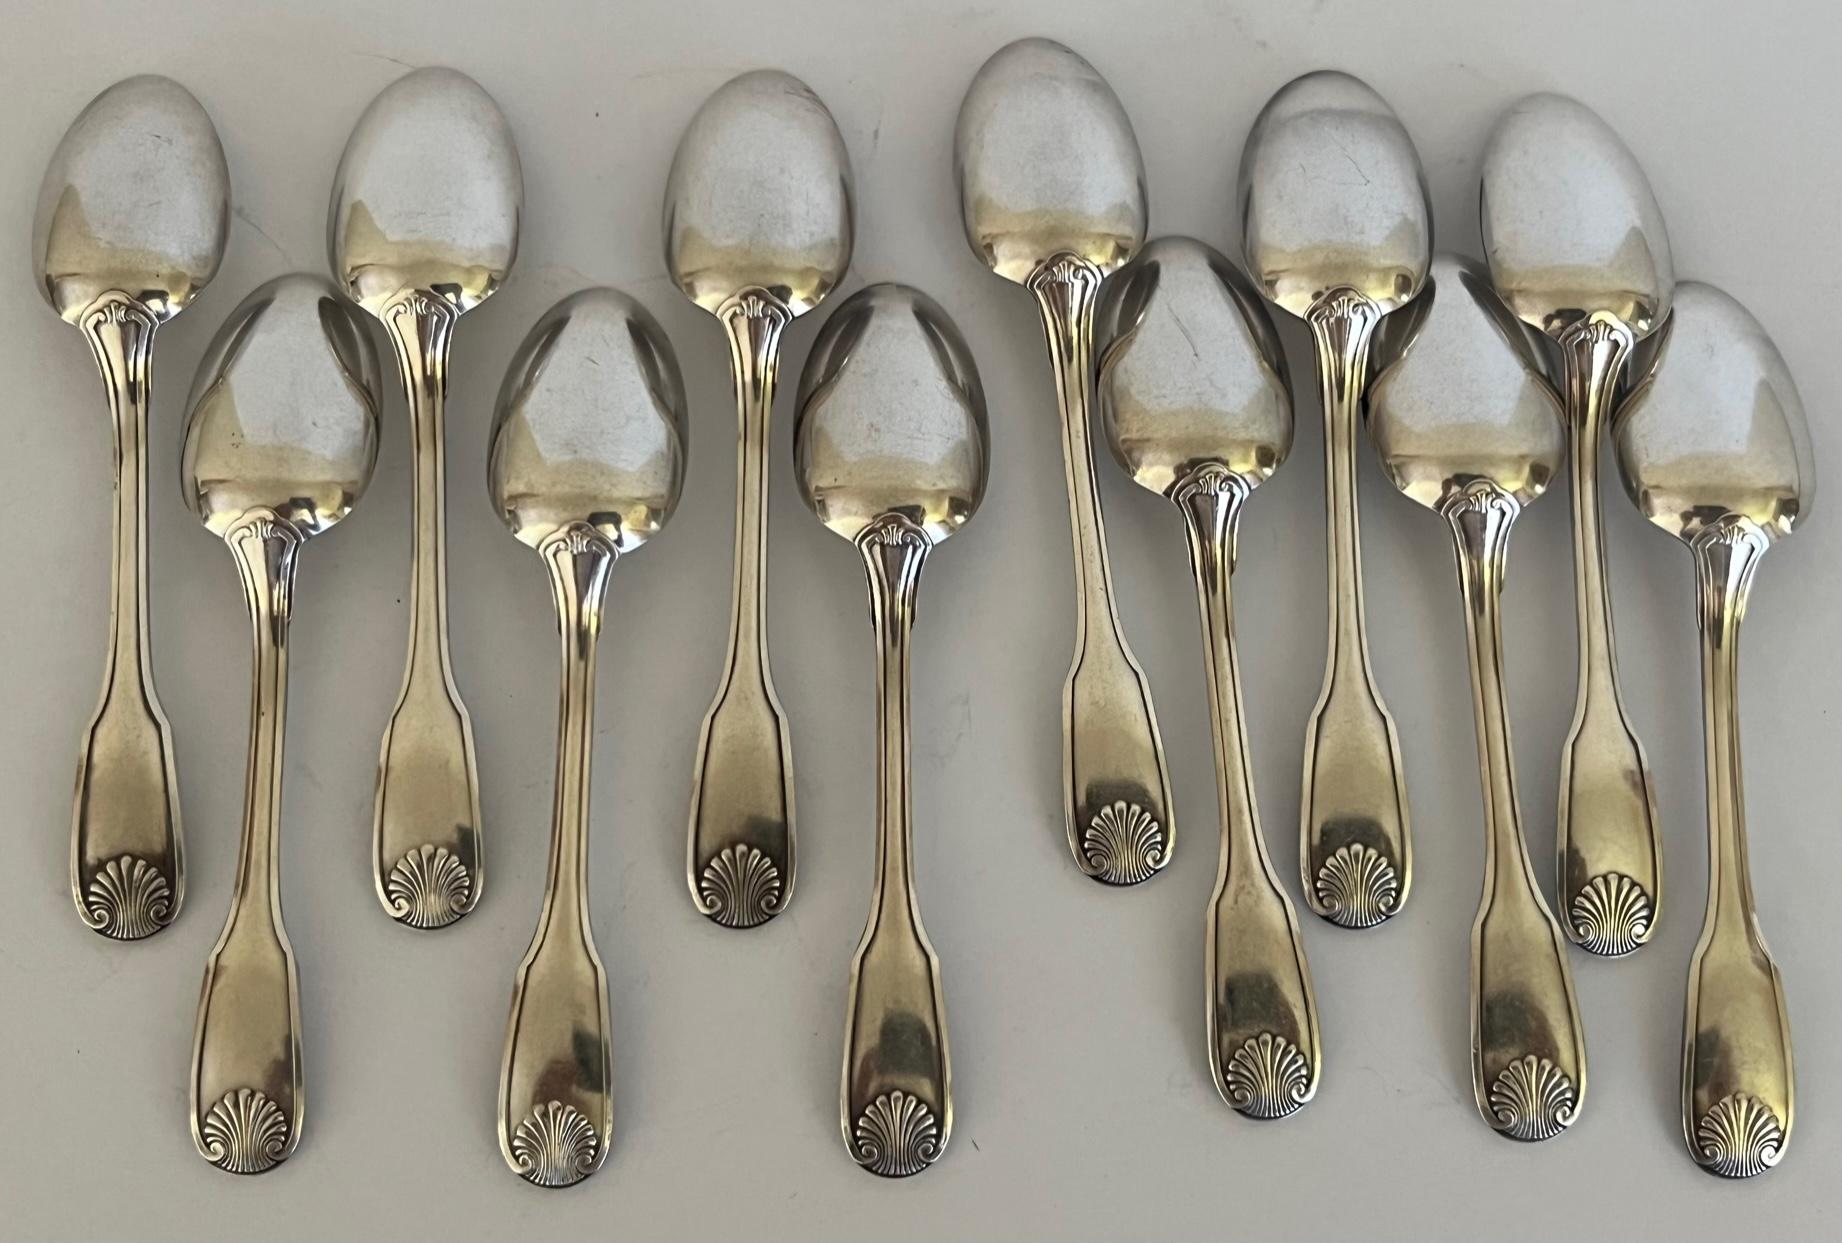 Christofle Demitasse Spoons in Vendome Pattern in Box- Set of 12 For Sale 4